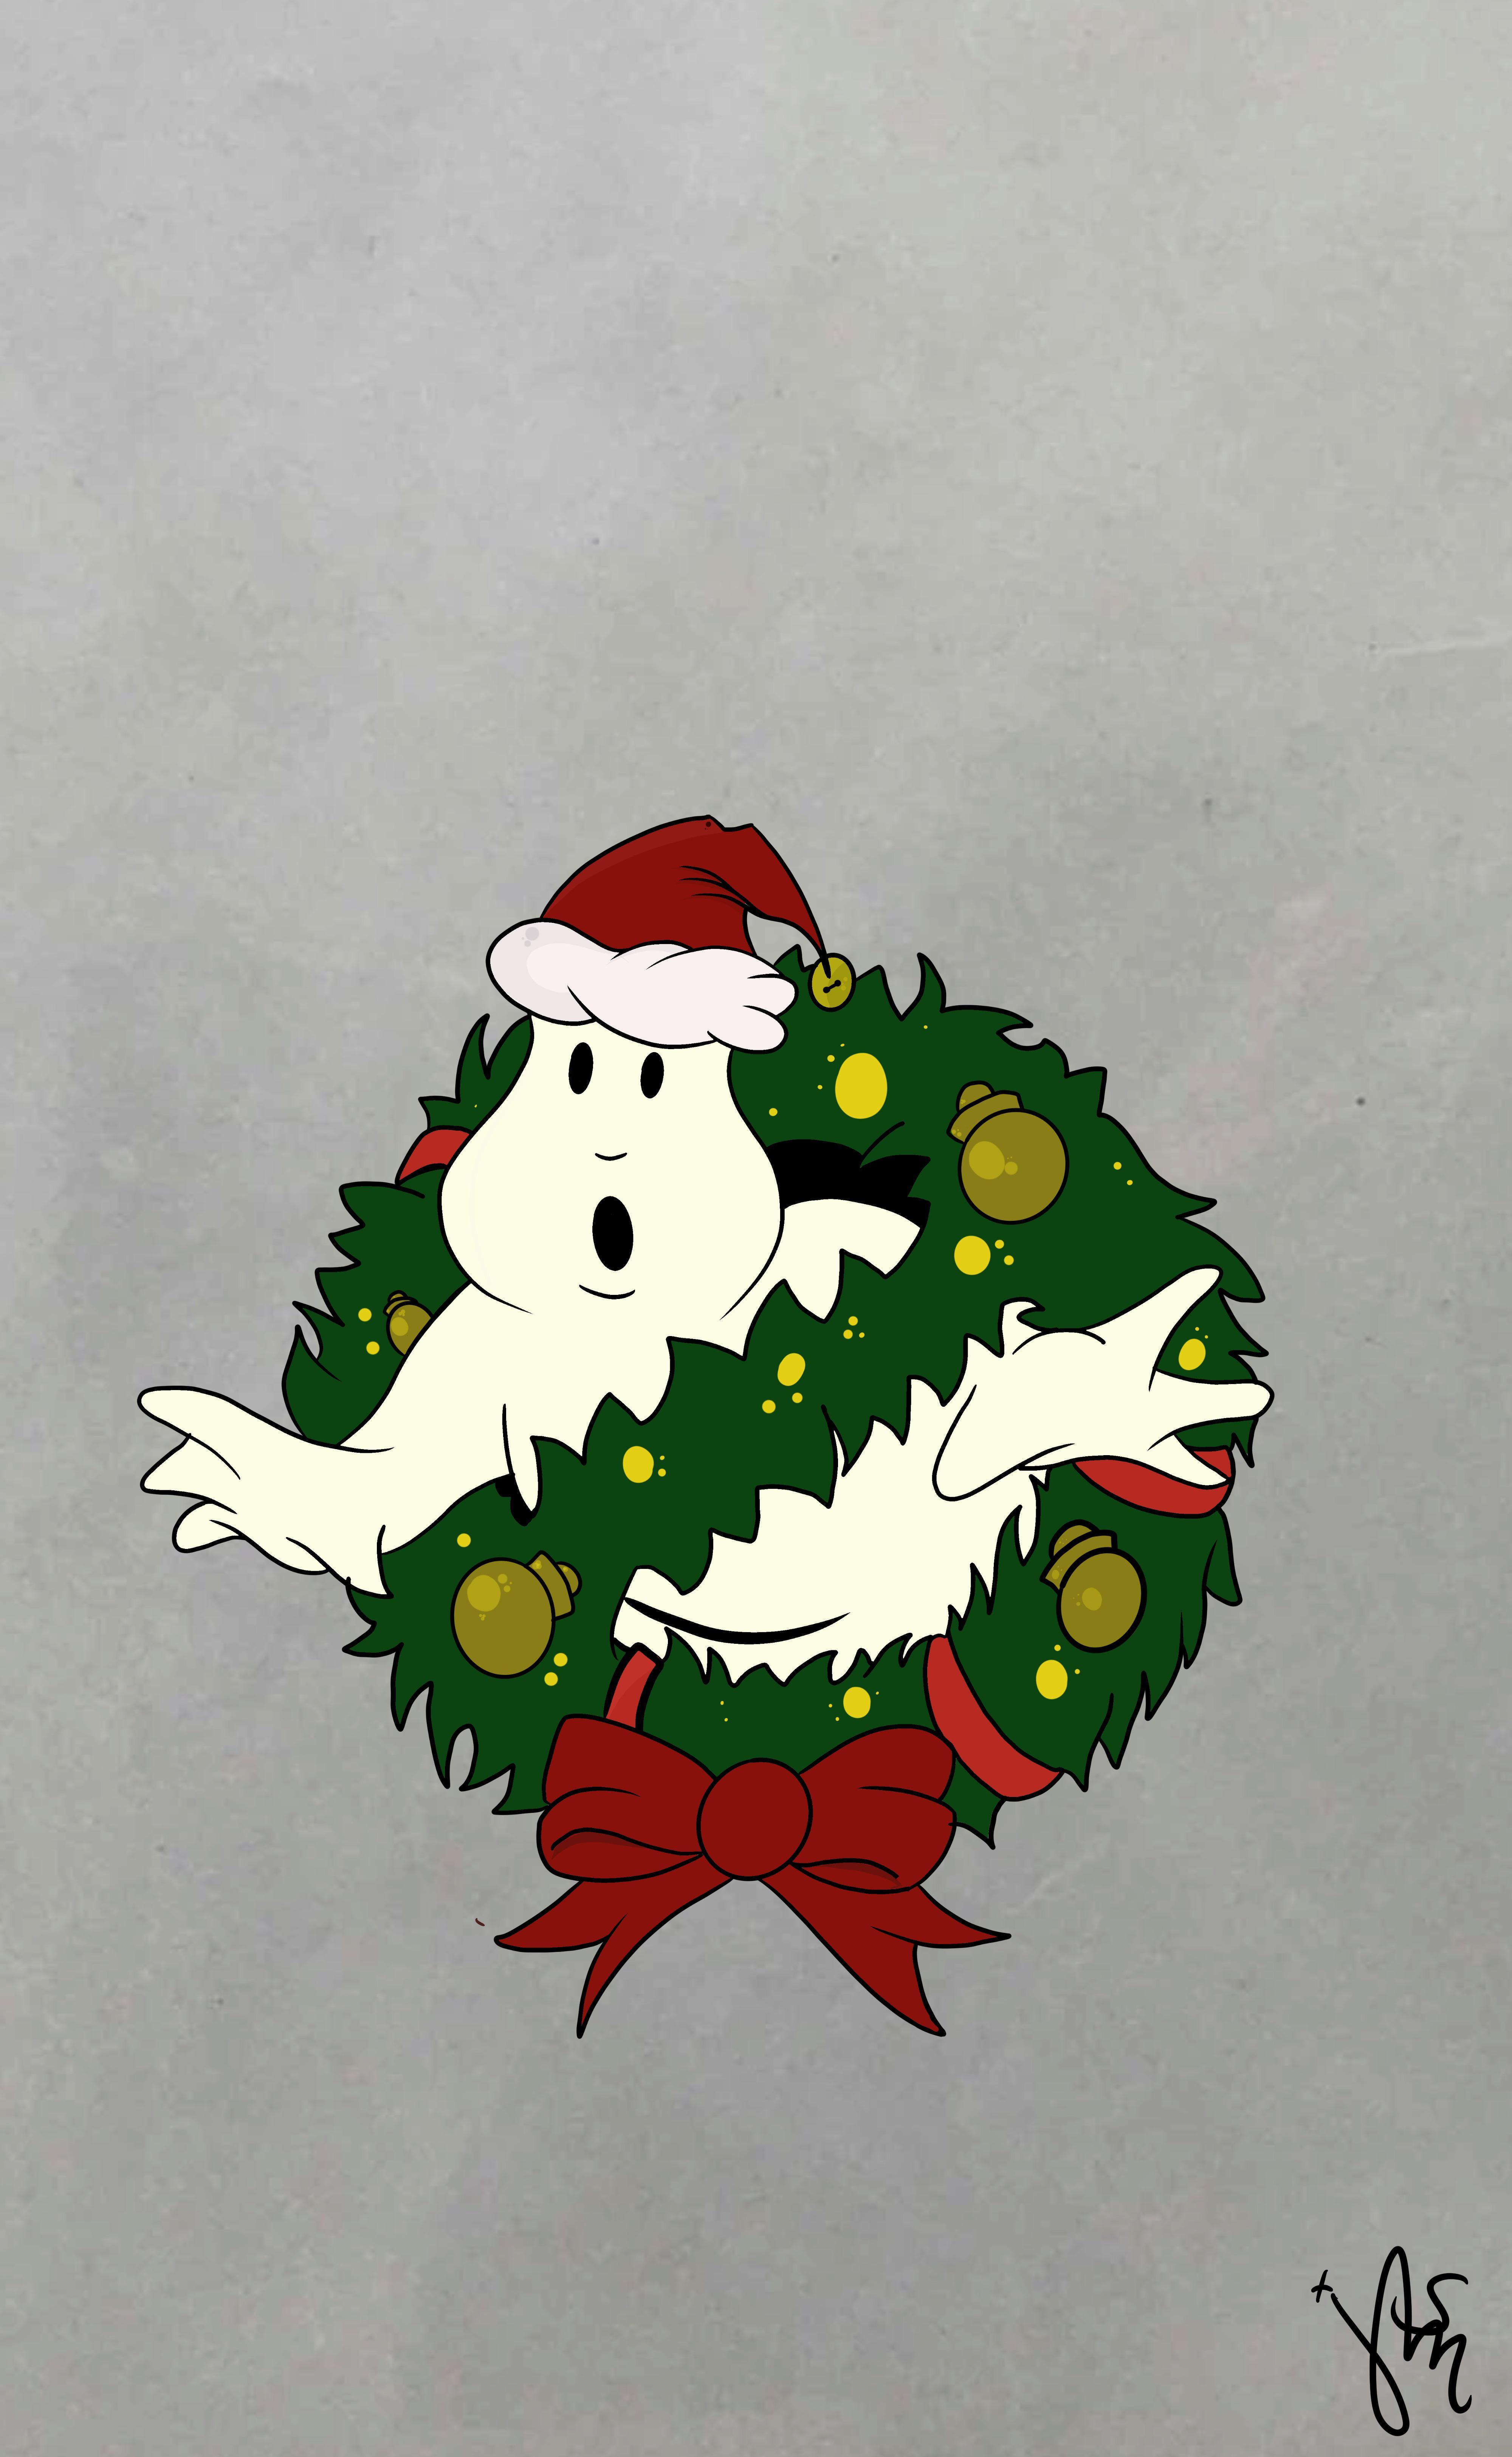 Made a simple phone wallpaper for Christmas for anyone whos